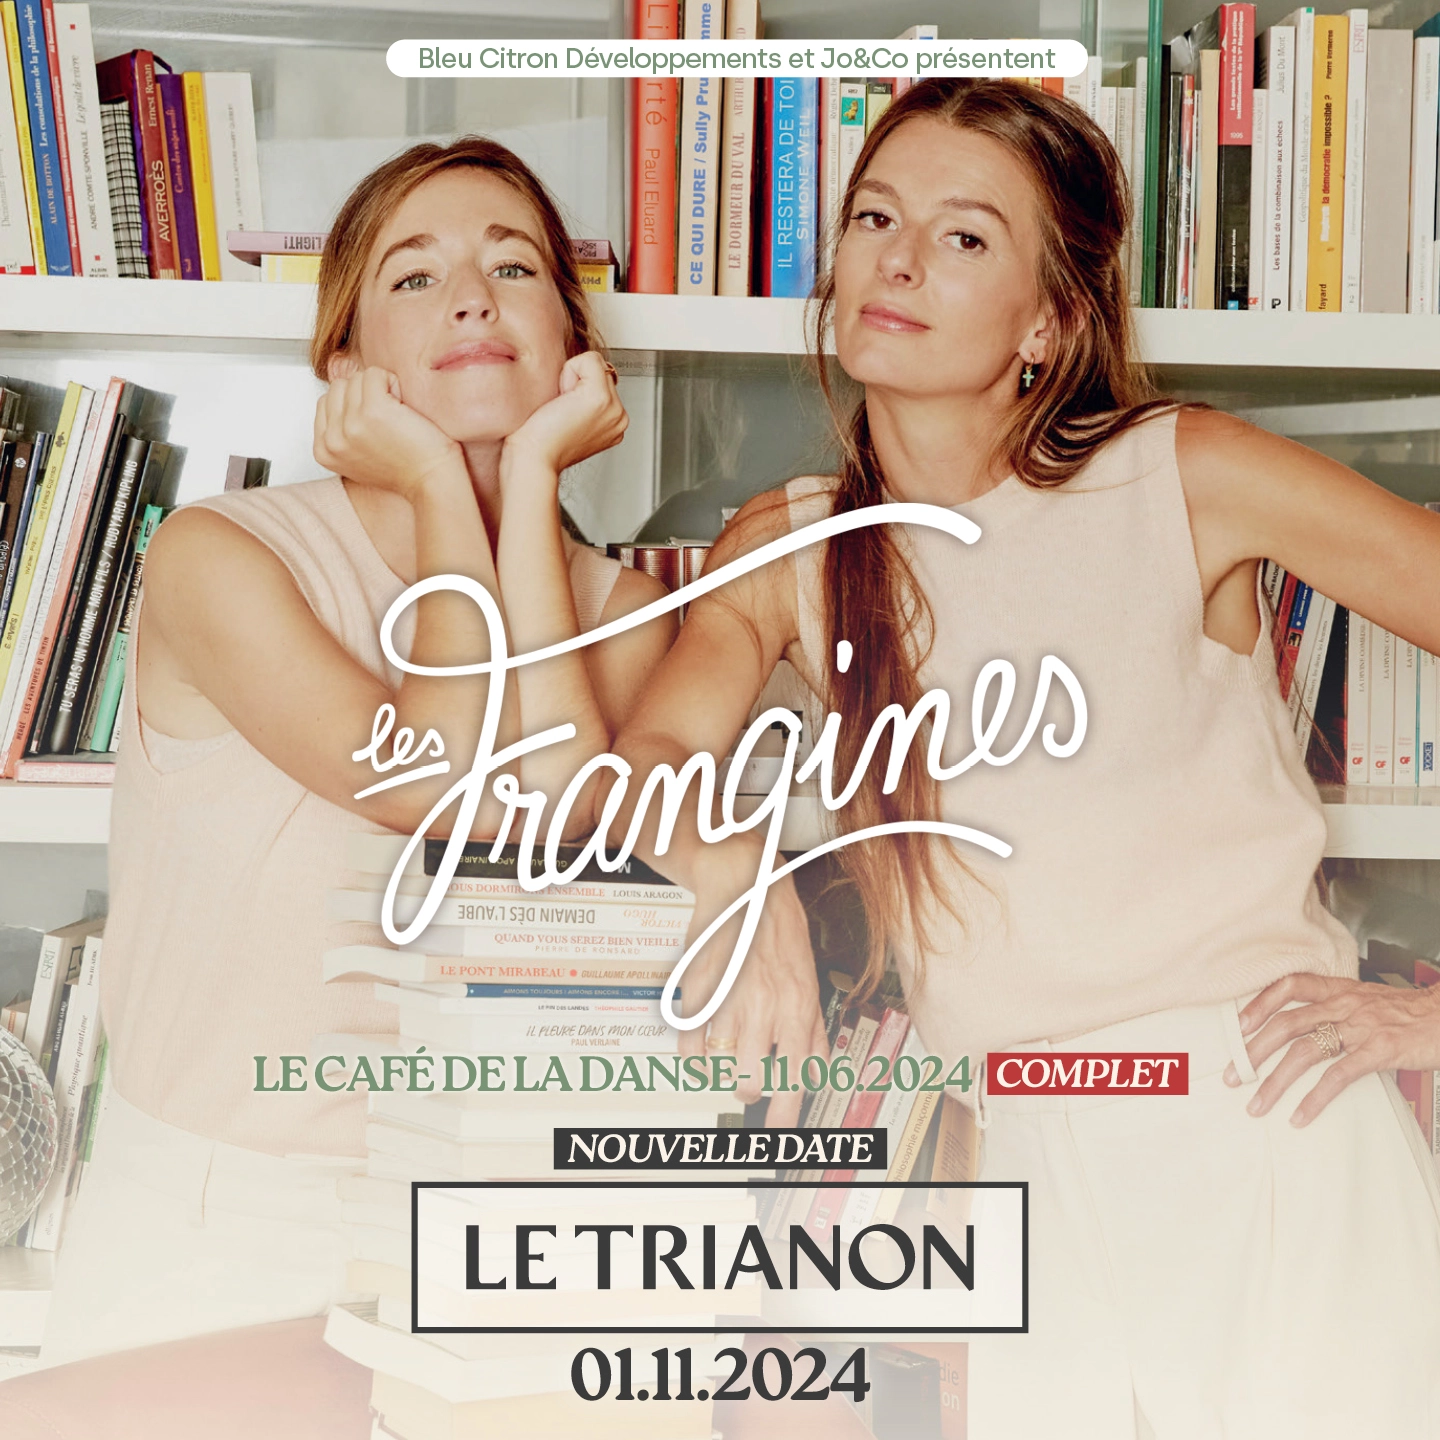 Les Frangines at Le Trianon Tickets